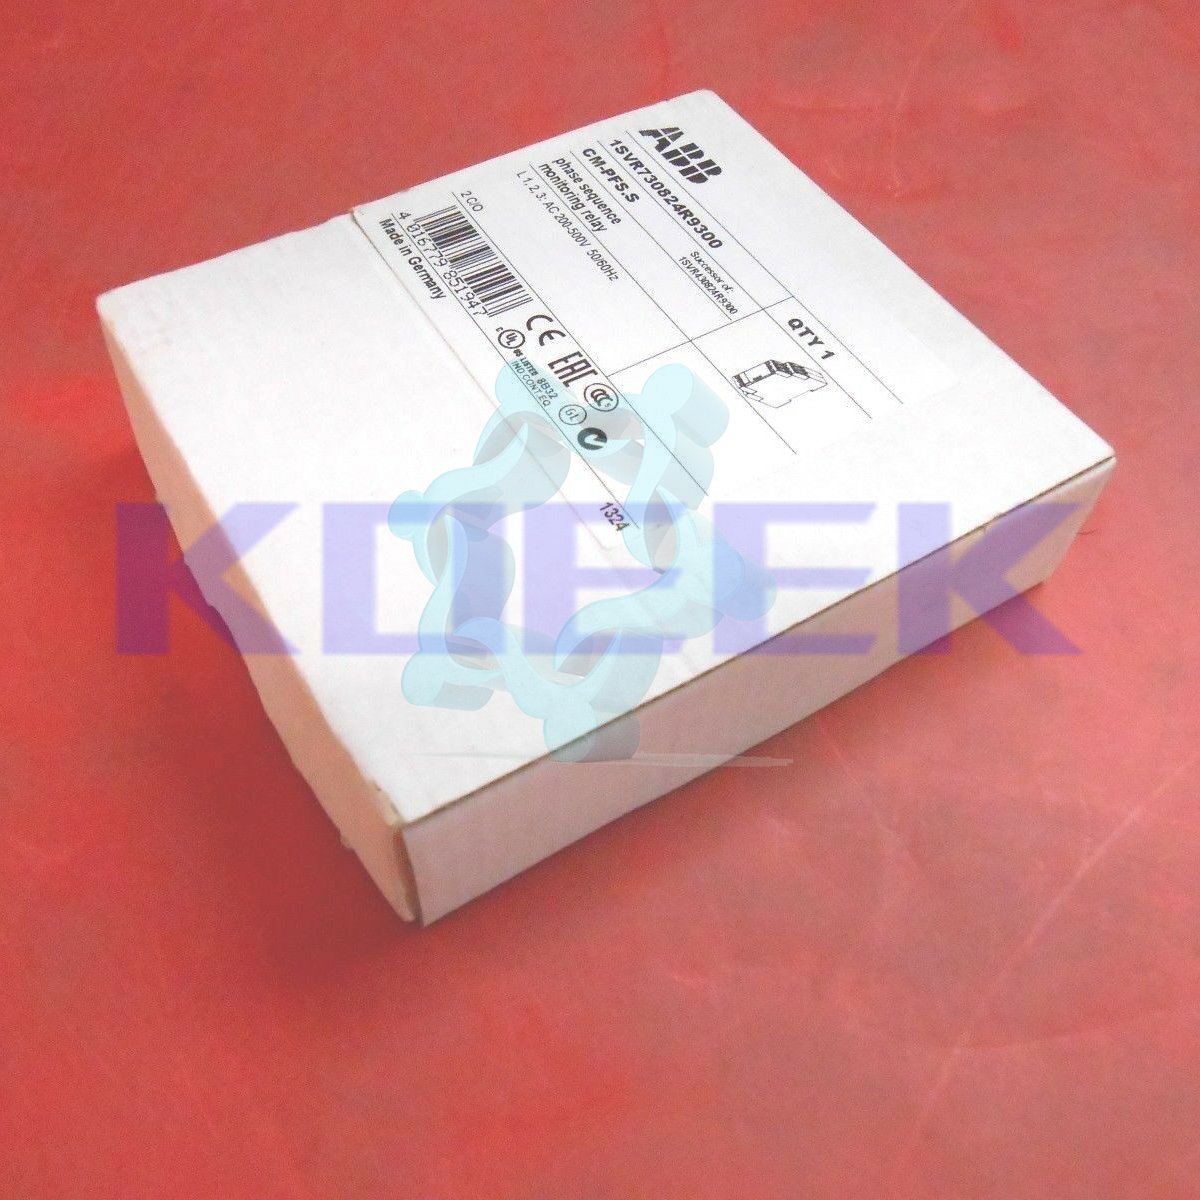 CM-PFS.S KOEED 101-200, ABB, import_2020_10_10_031751, NEW, Other